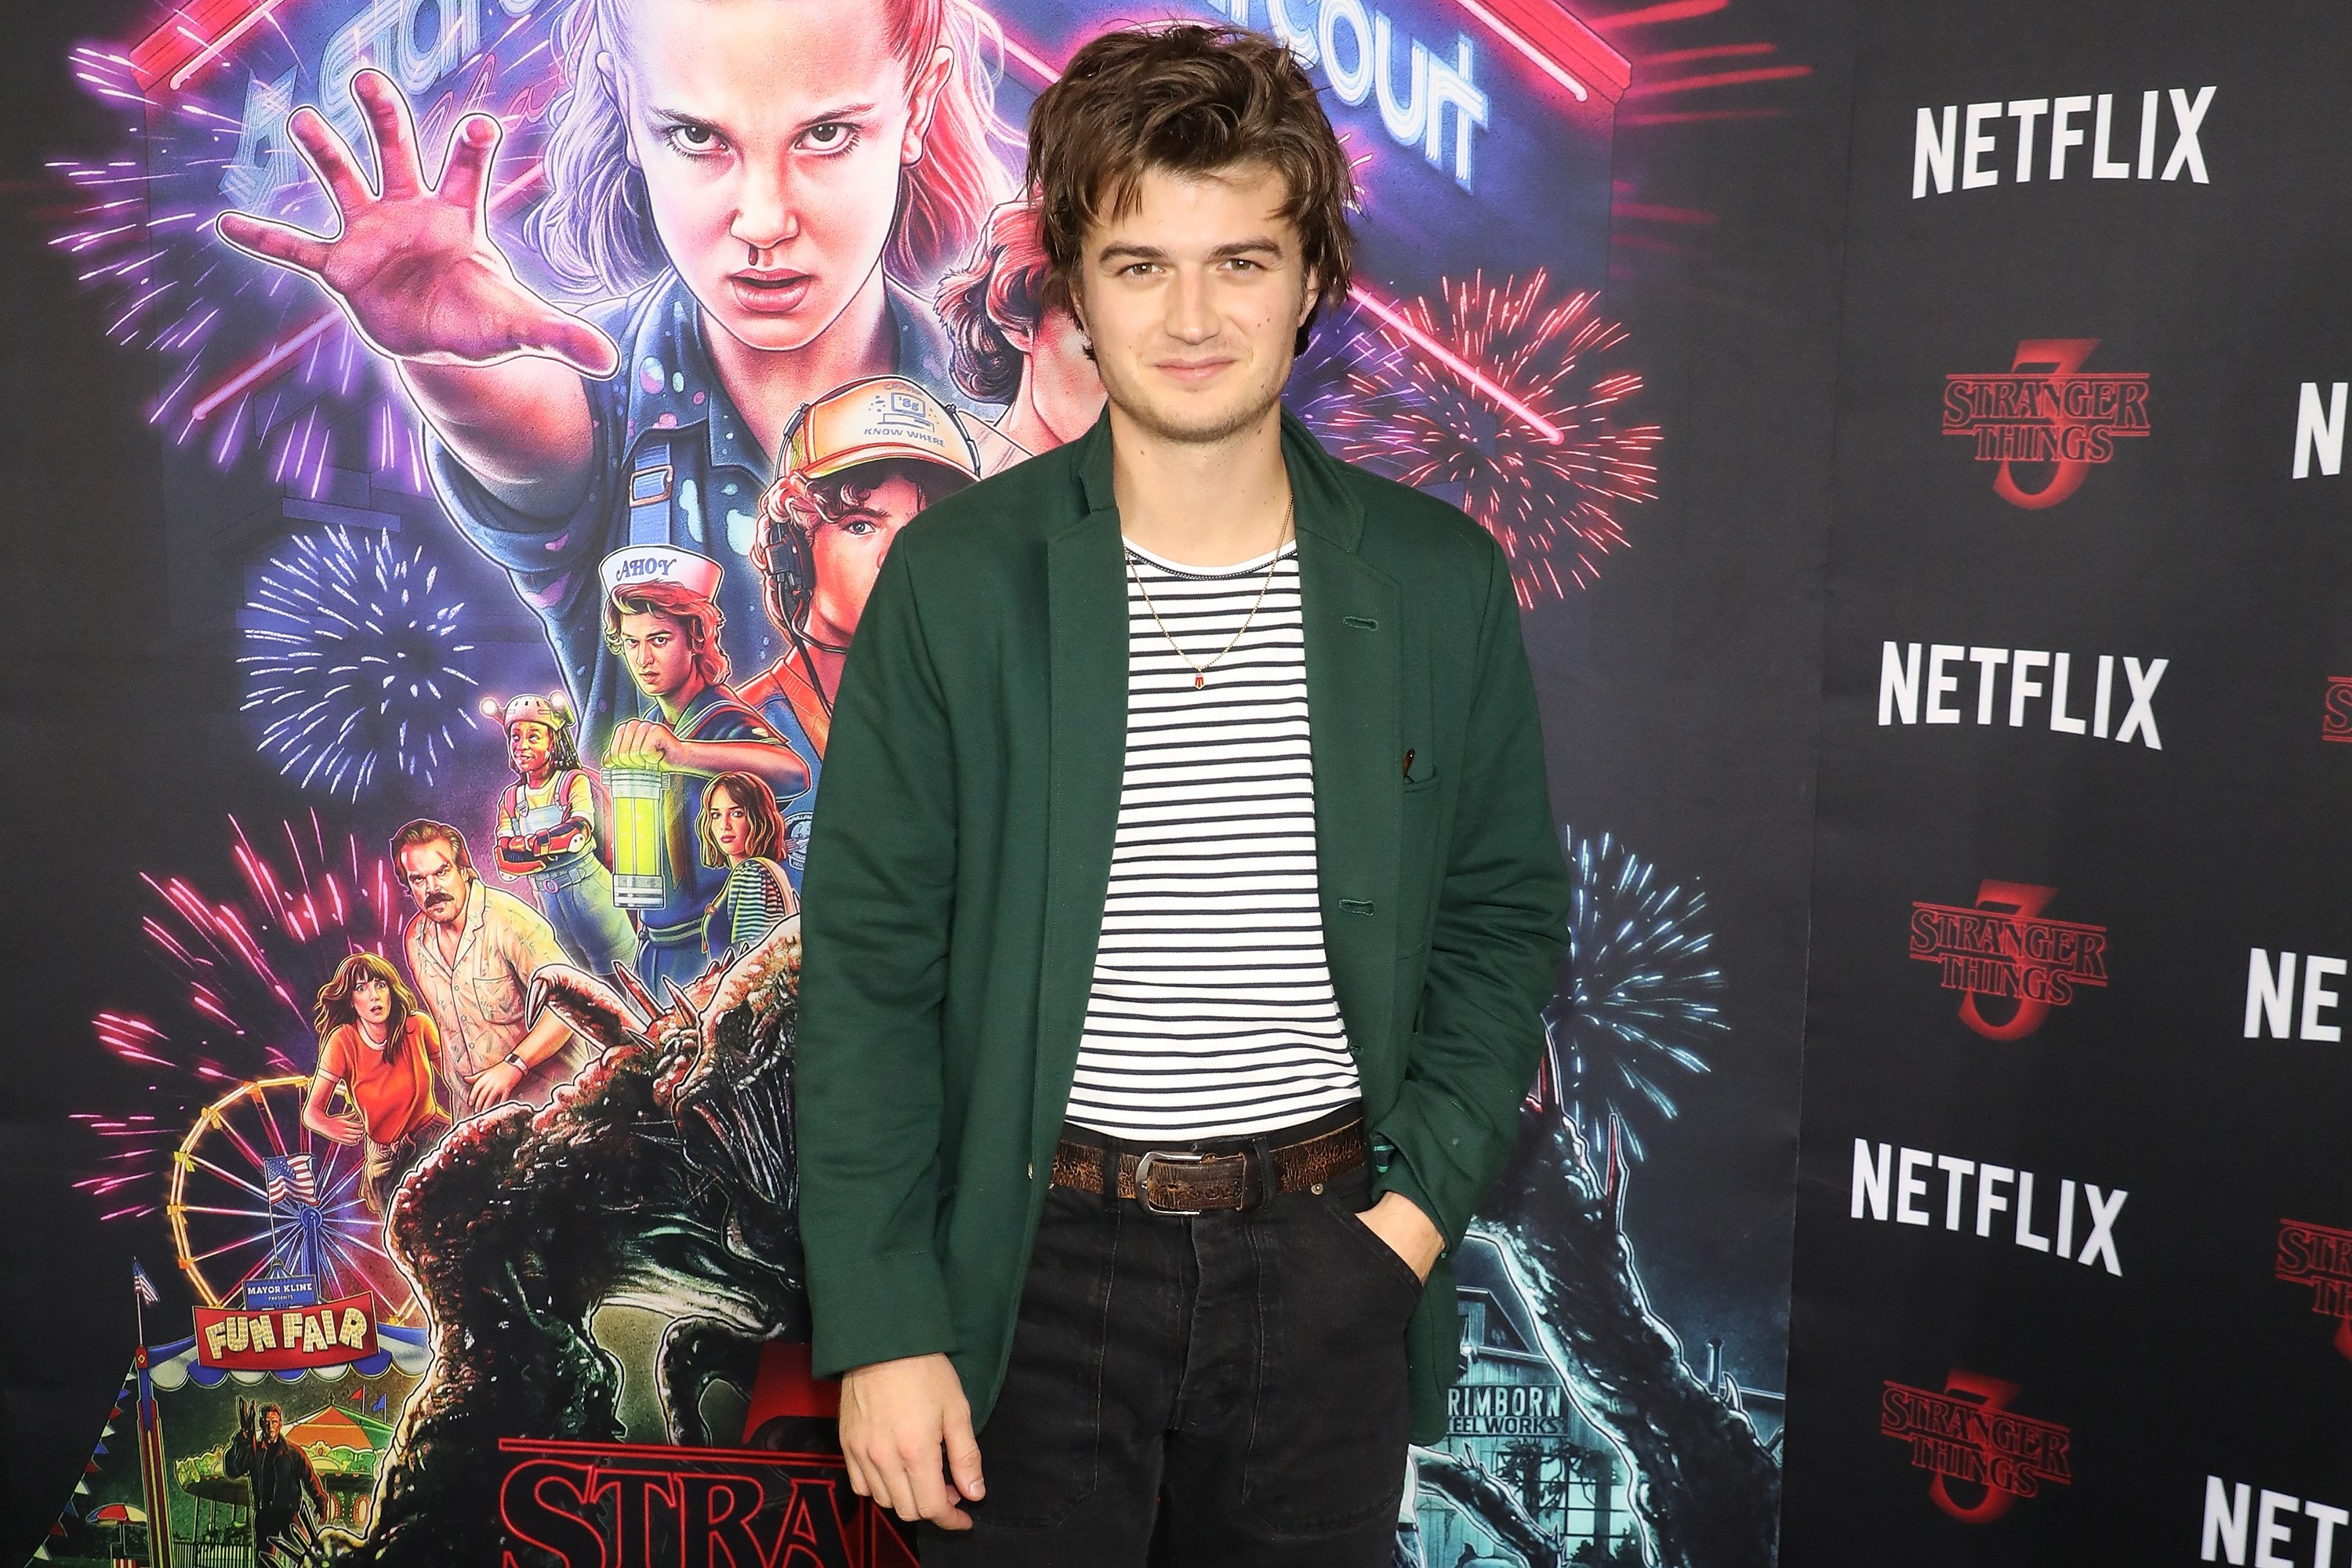 'Stranger Things' starJoe Keery wearing a green jacket, a black and white striped shirt, and black jeans at a screening of Season 3.